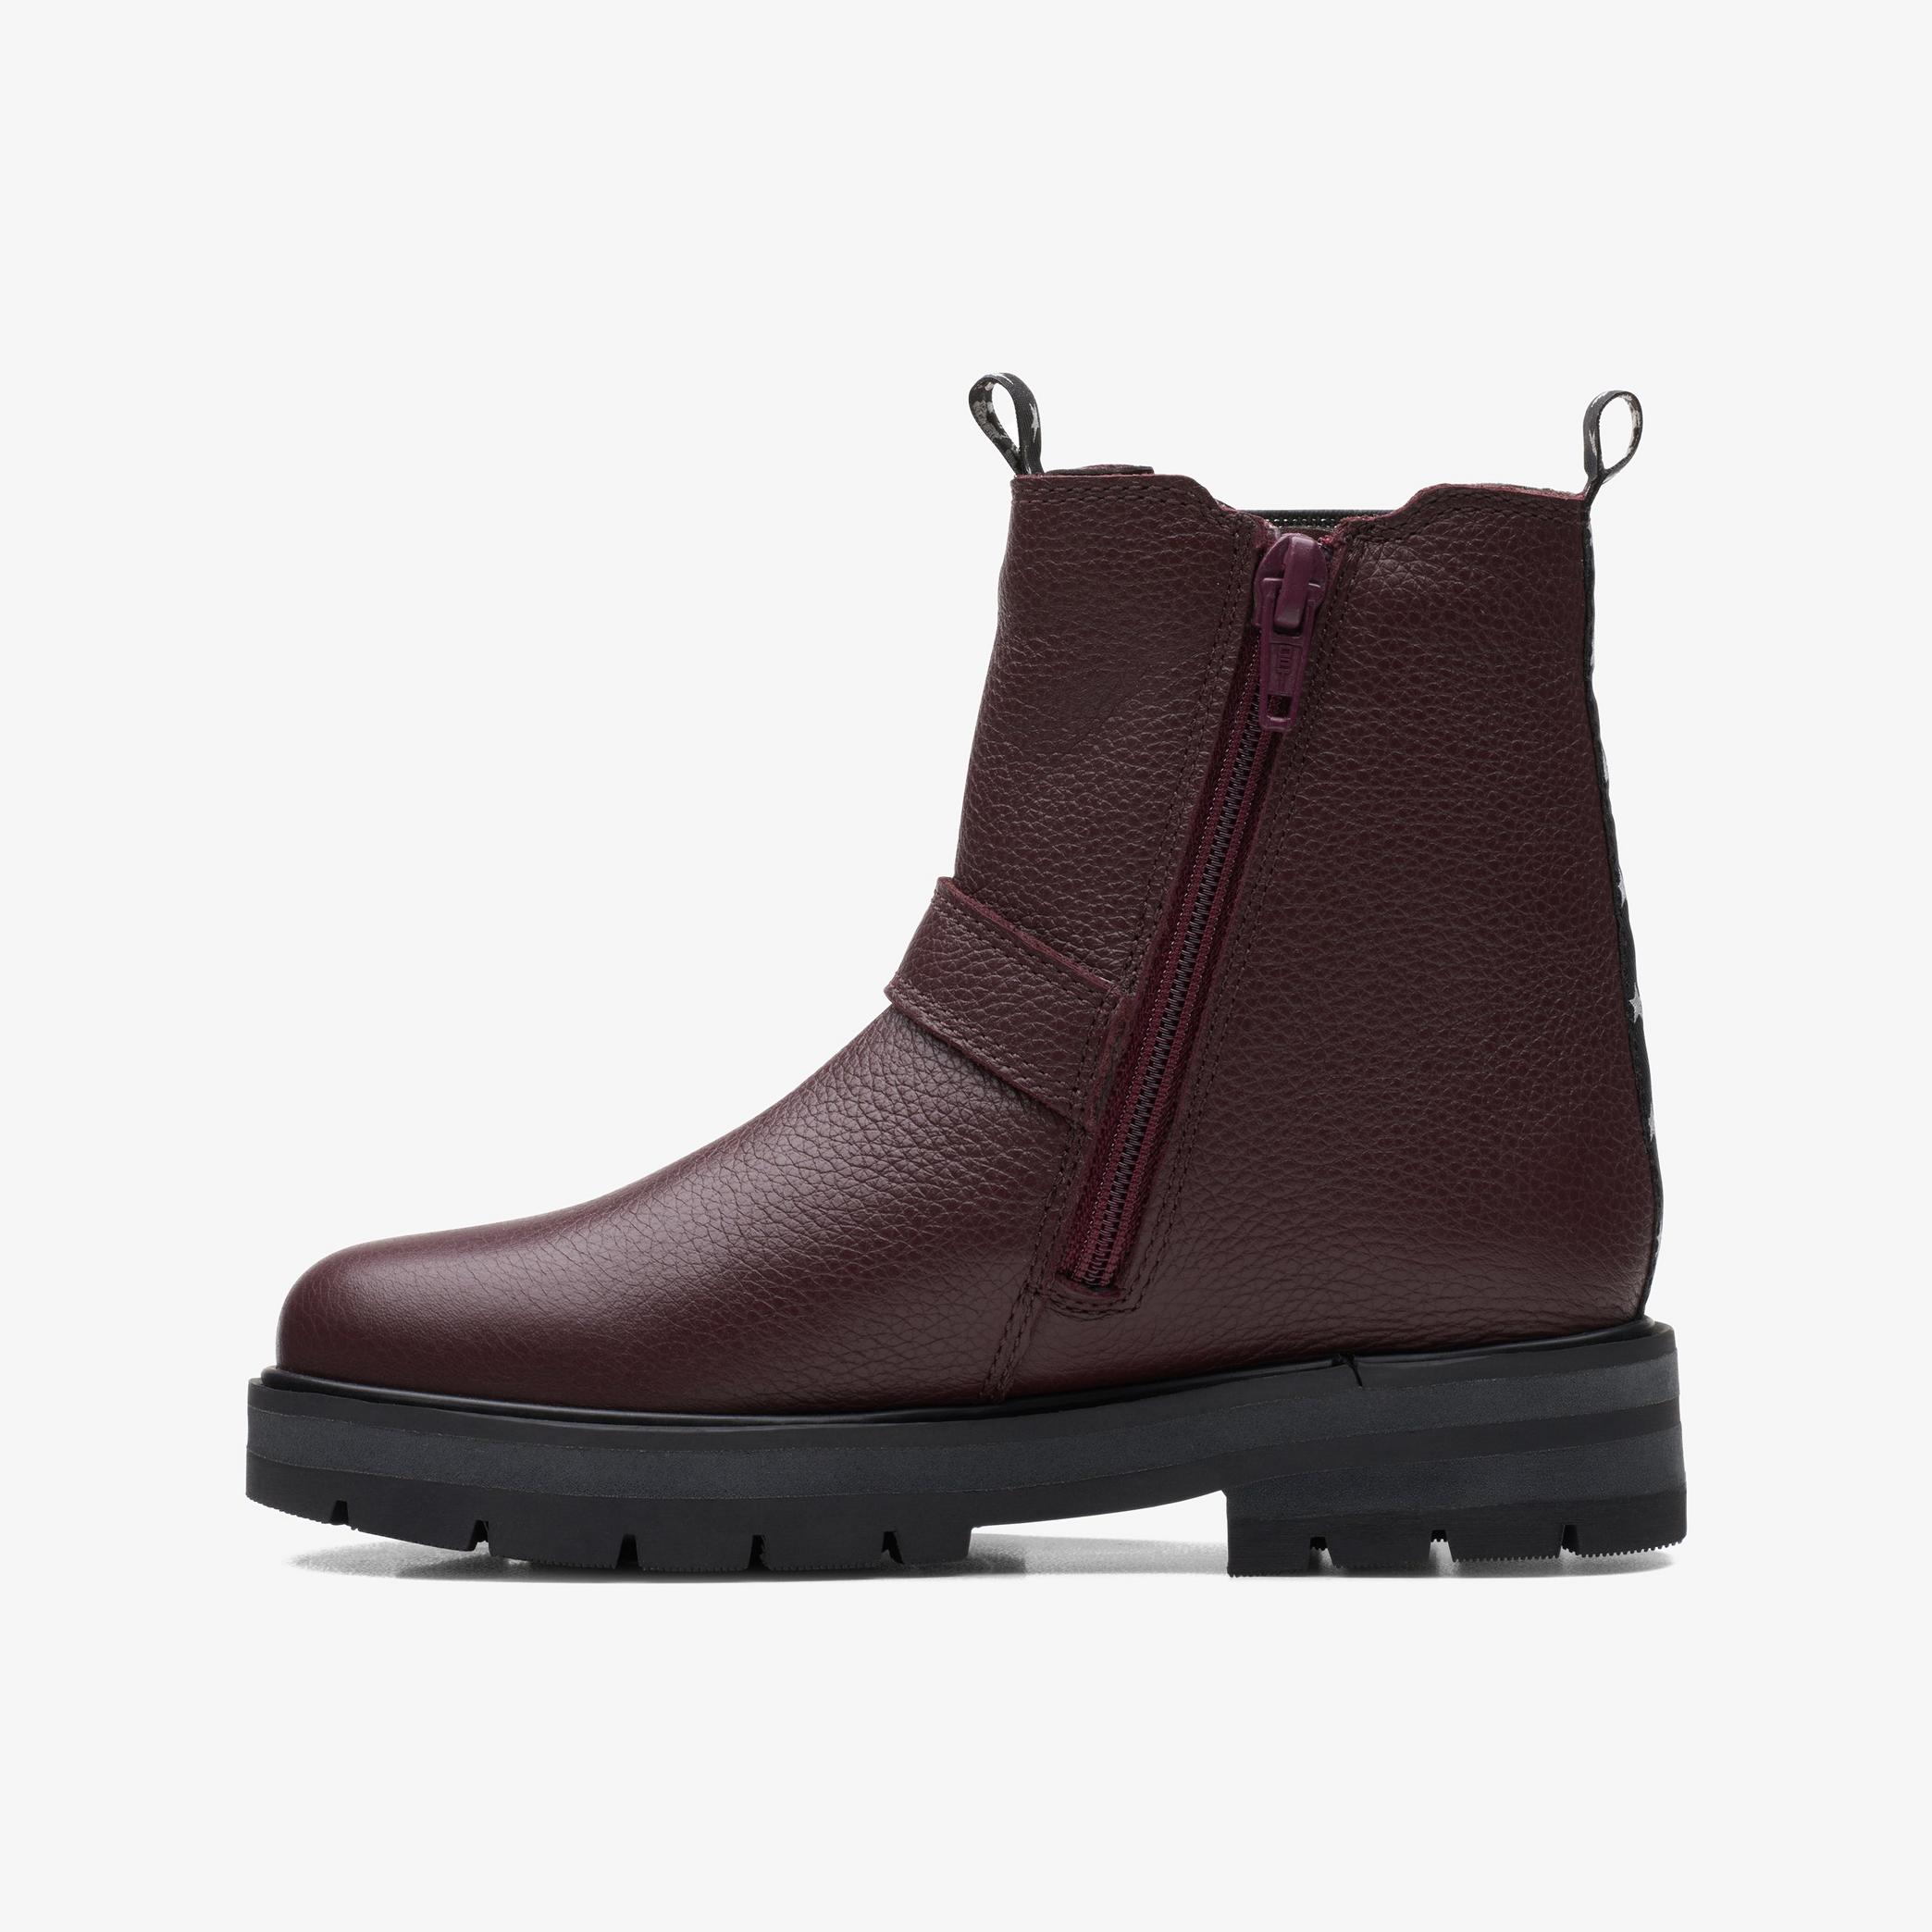 Prague River Kid Burgundy Leather Ankle Boots, view 2 of 6